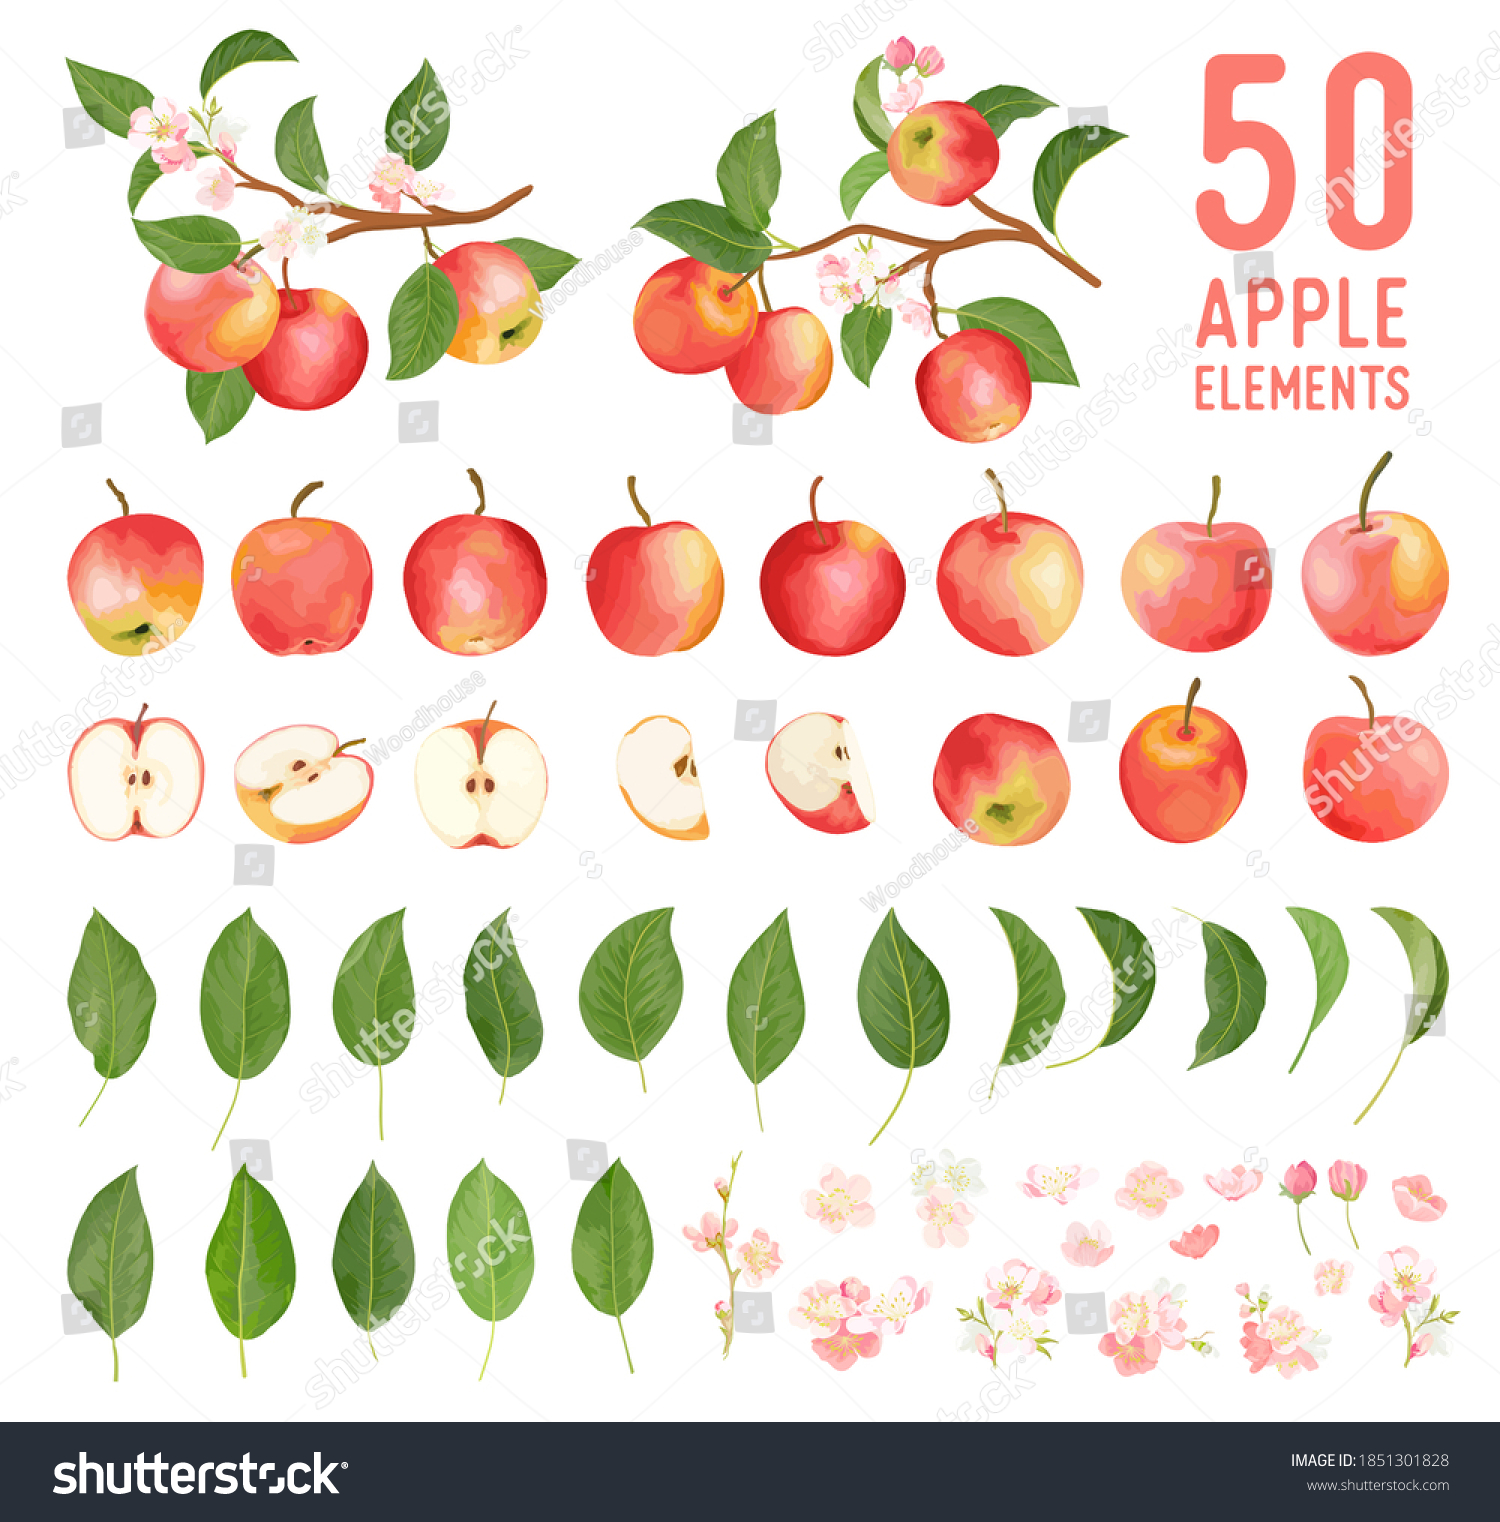 Watercolor elements of apple fruits, leaves and flowers for posters, wedding cards, summer boho banners, cover design templates, social media stories, spring wallpapers. Vector apples illustration #1851301828